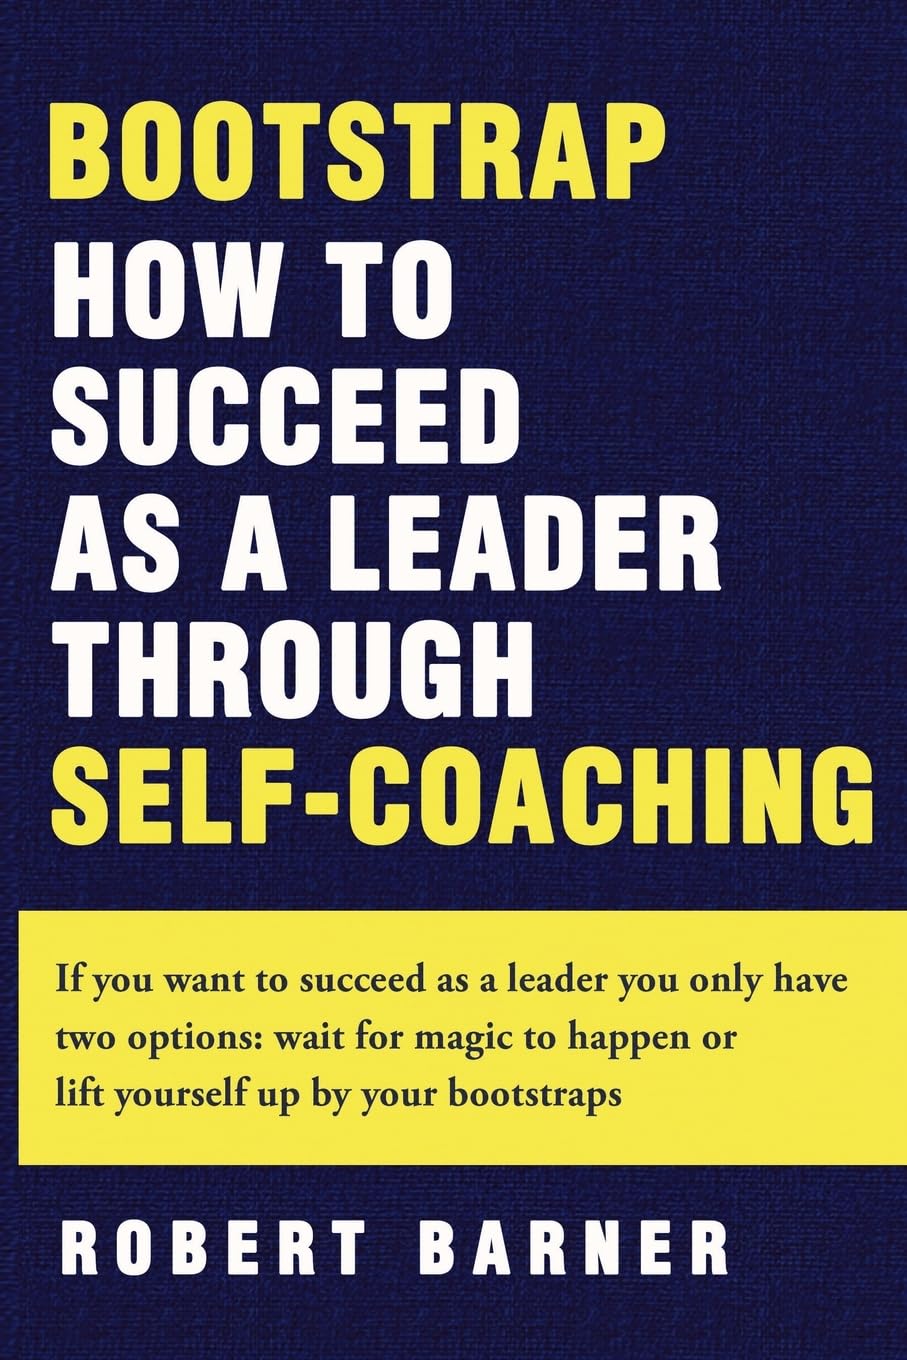 New Book By Dr. Robert Barner Shows Leaders How to Succeed Through Self-Coaching